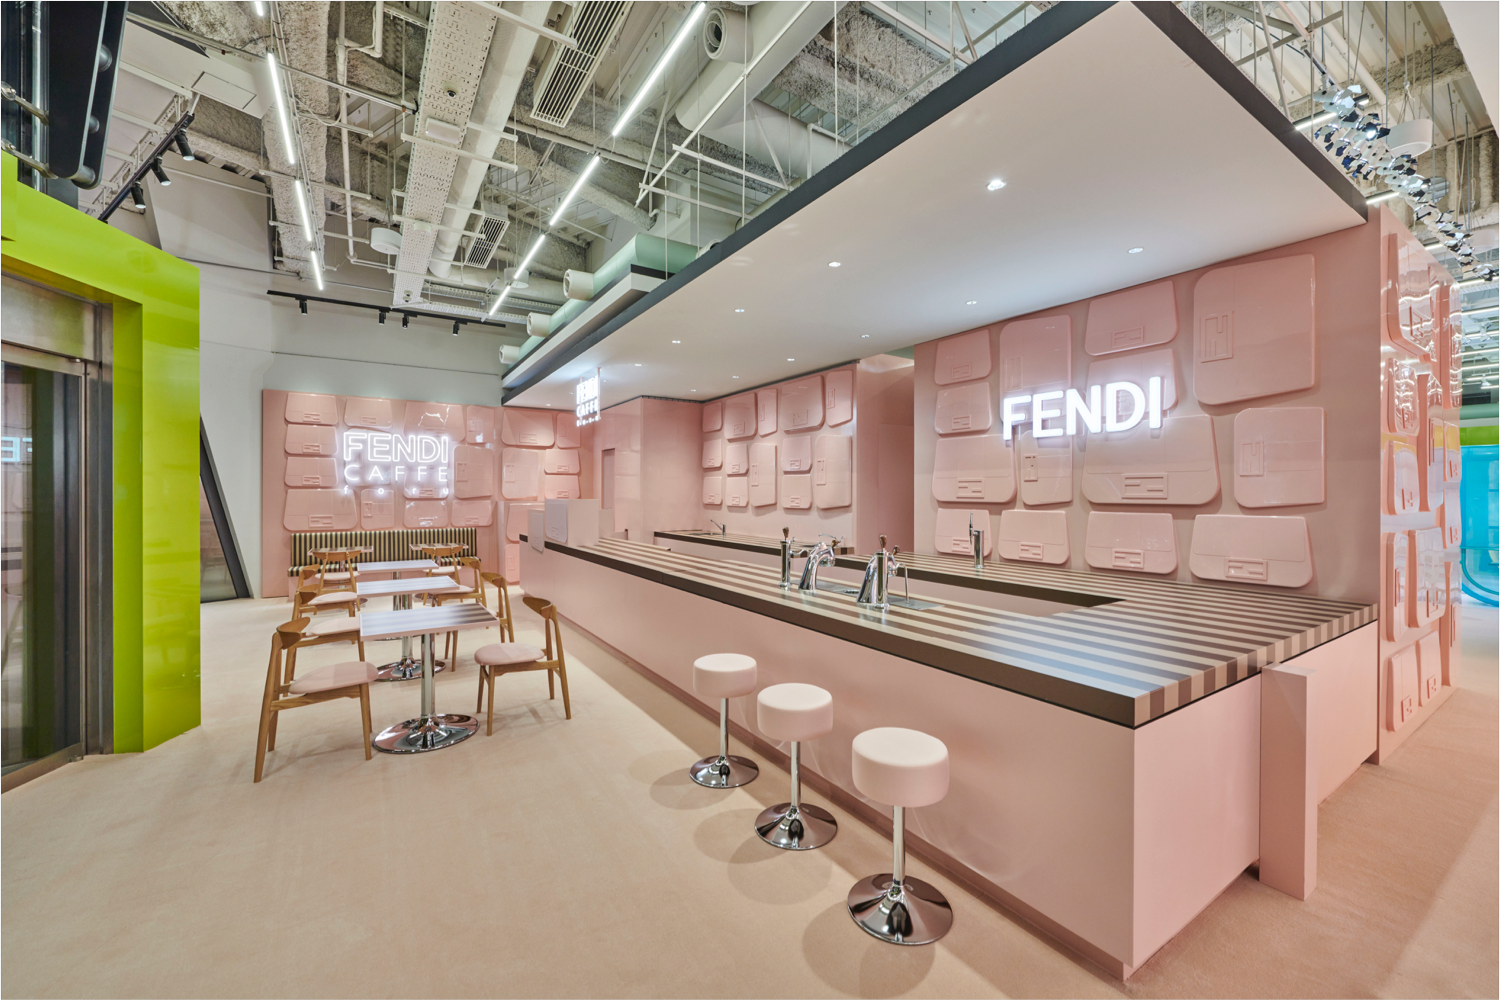 Fendi on X: The #FendiPeekaboo – your way. Drop by our iconic pop-up bar  offering special customization services, open between November 30th and  December 15th at the #Fendi Ginza boutique in Tokyo